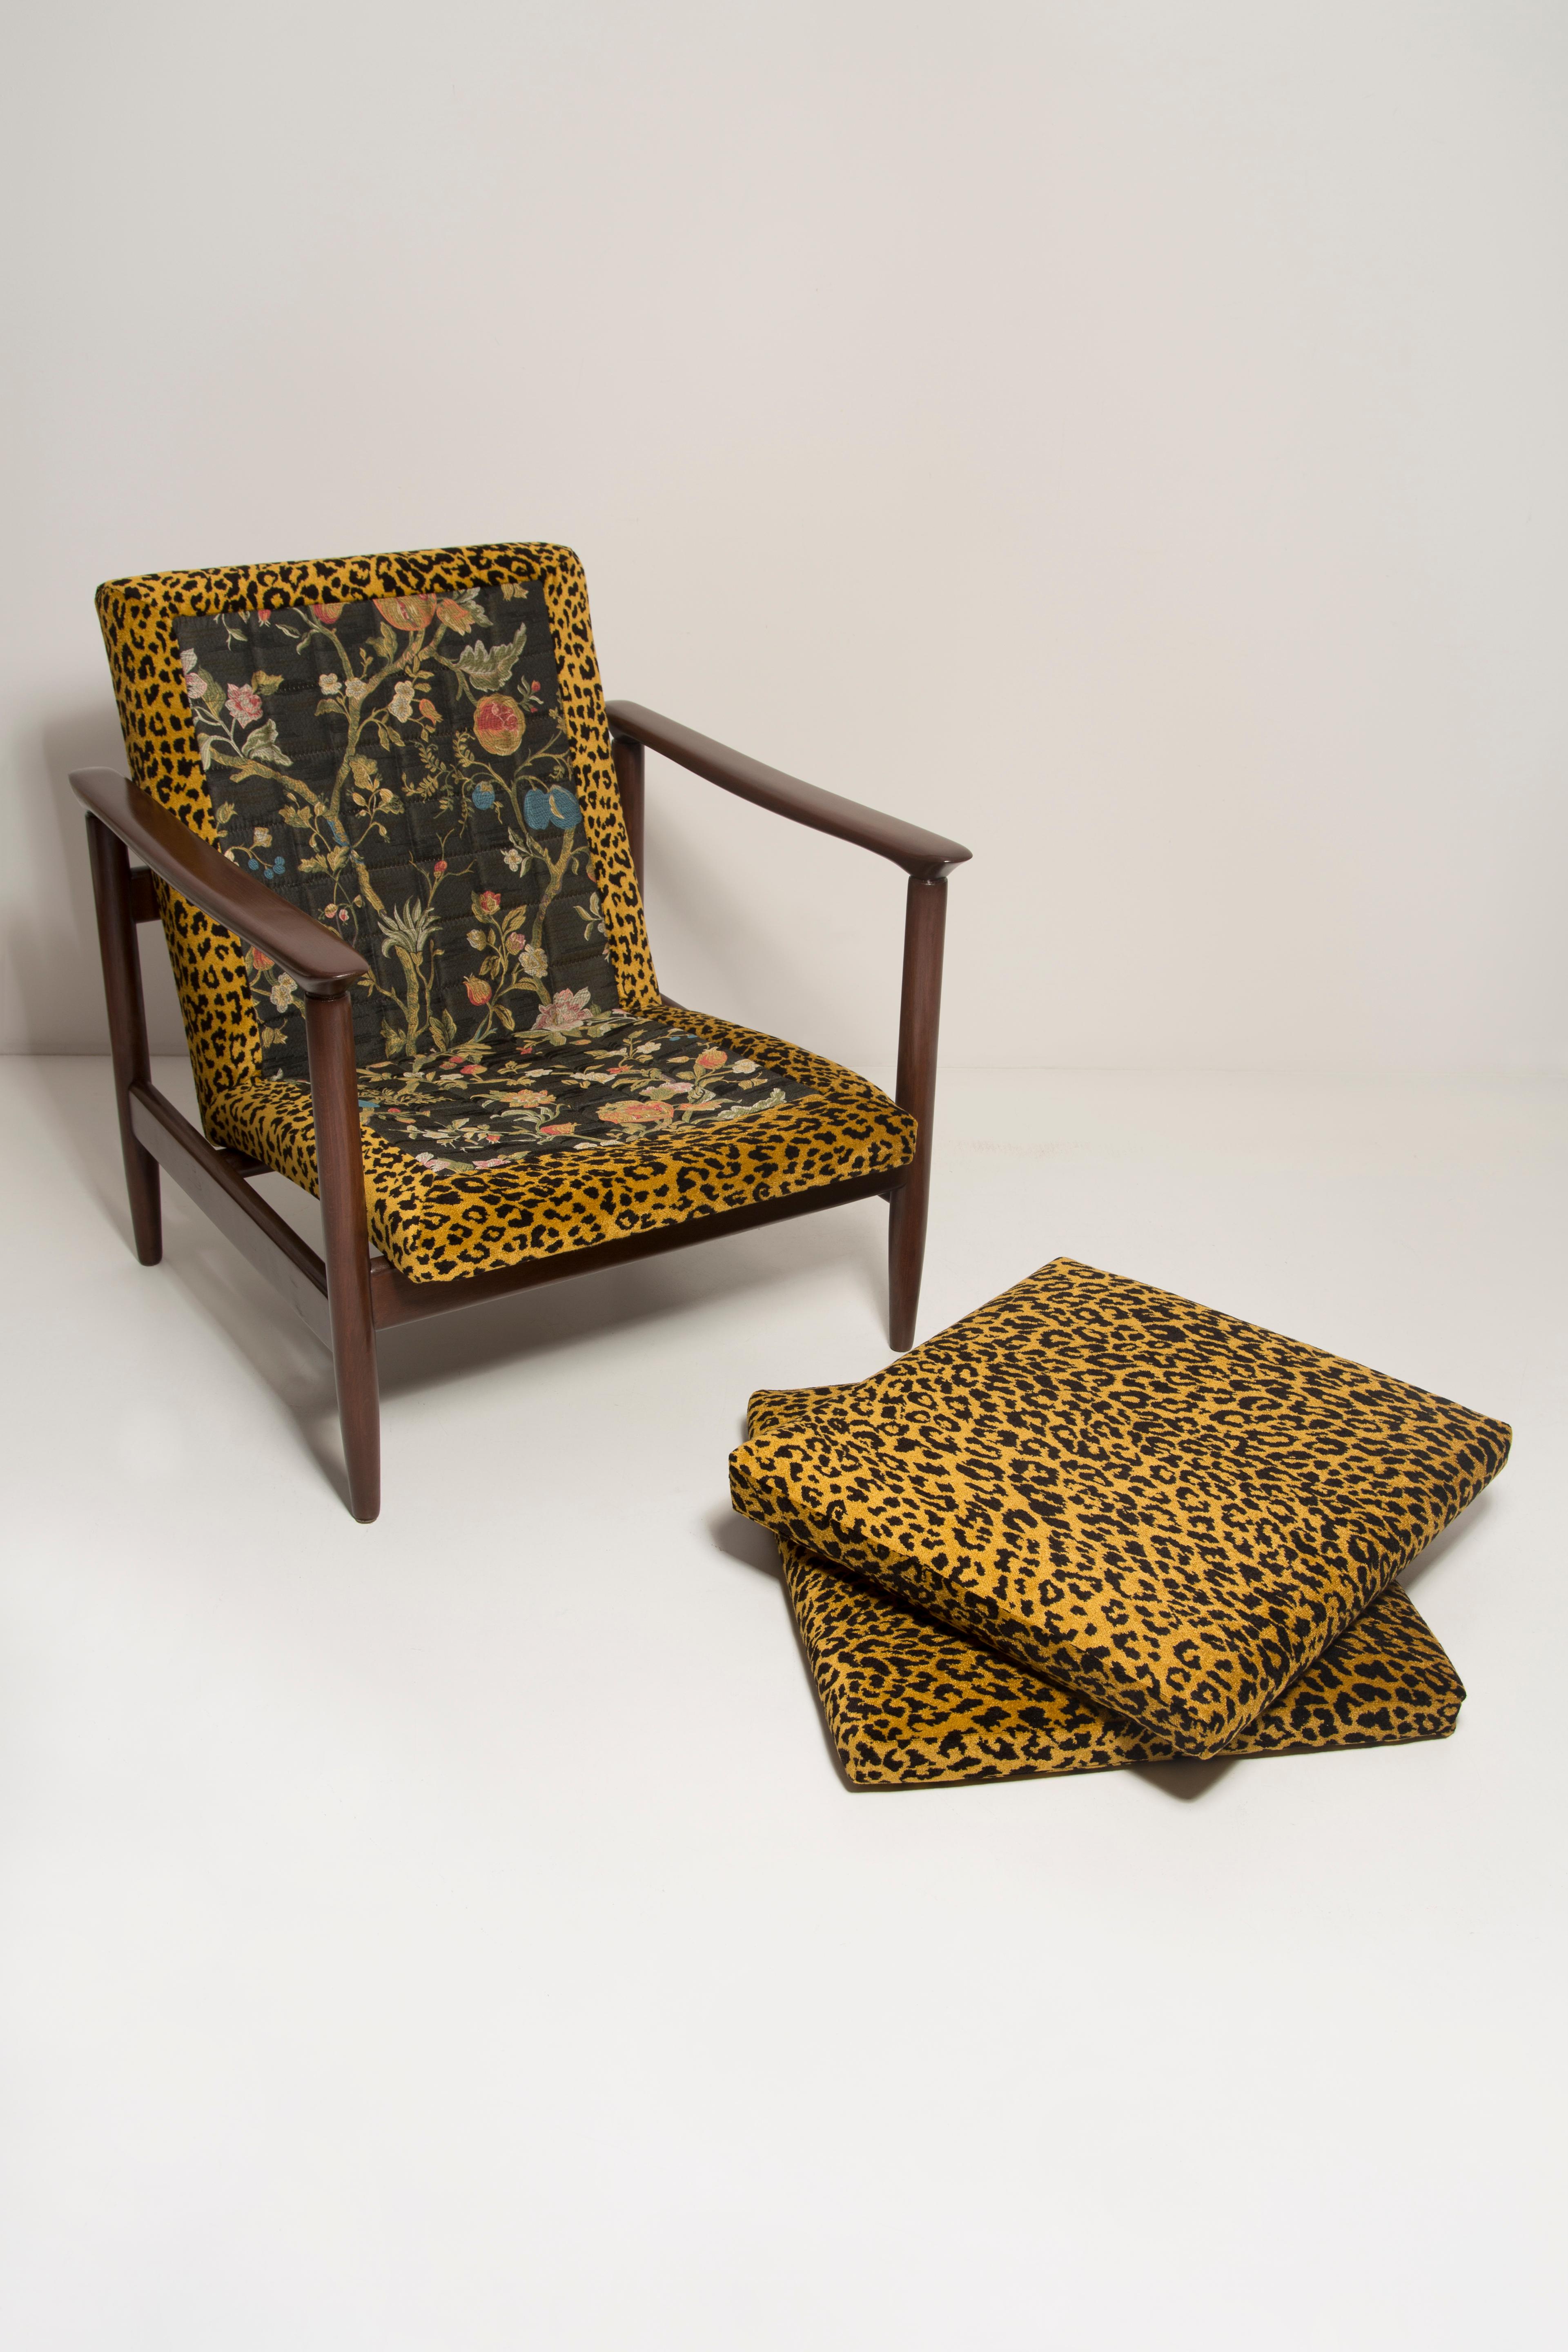 Pair of Midcentury Leopard Armchairs, GFM 142, Edmund Homa, Europe, 1960s For Sale 4